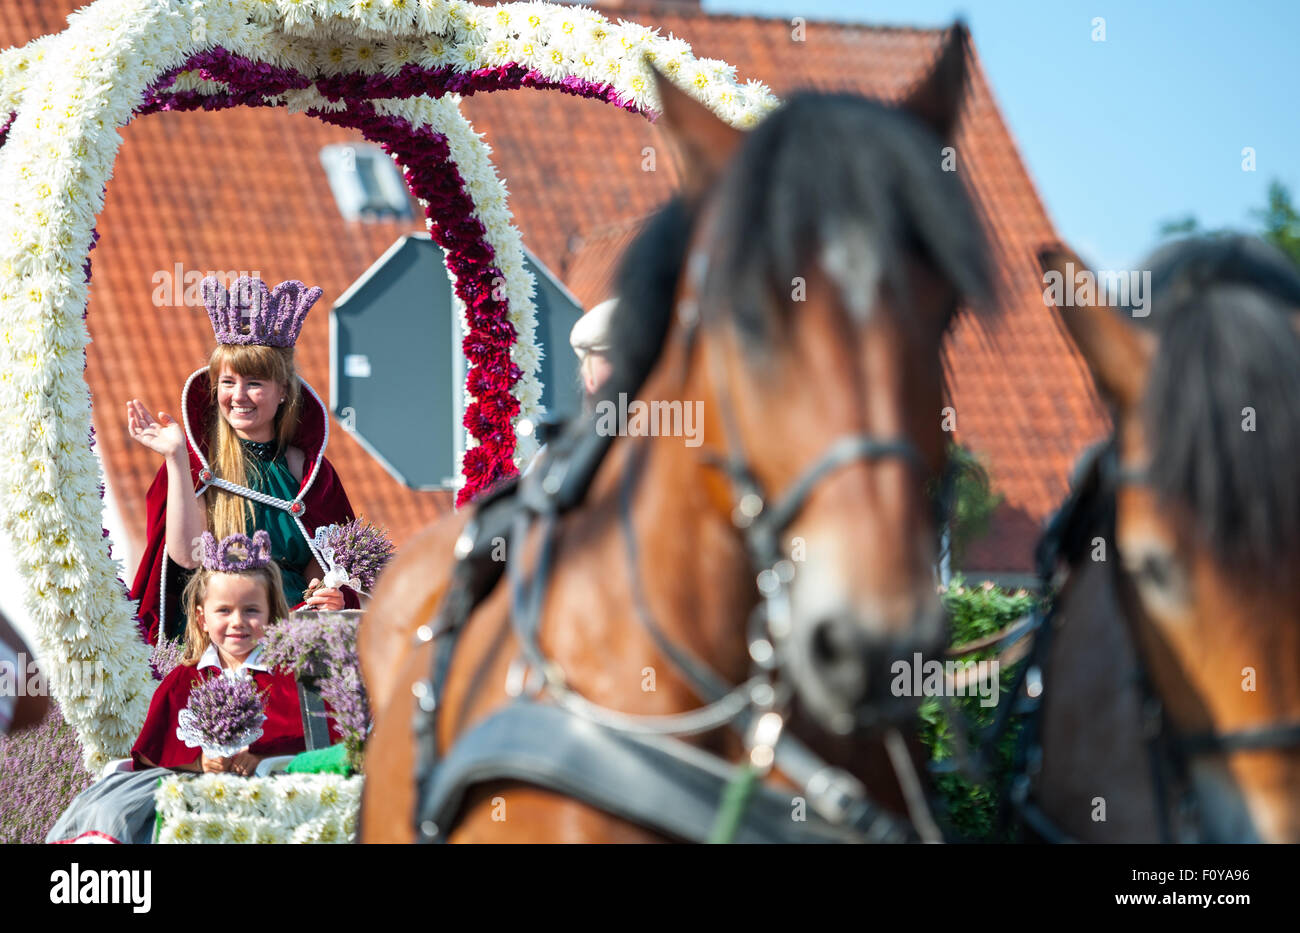 Amelinghausen, Germany. 23rd Aug, 2015. 22-year-old Victoria Glaser smiles as she sits on a float after being elected the new Heather Queen in Amelinghausen, Germany, 23 August 2015. The annual Heather Blossom Festival culminates in the election of the Heather Queen. After the coronation, a precession featuring festively decorated floats, music bands and other groups is held in the town. The new Heather Queen will now represent the region across Germany for a year. PHoto: PHILIPP SCHULZE/dpa/Alamy Live News Stock Photo